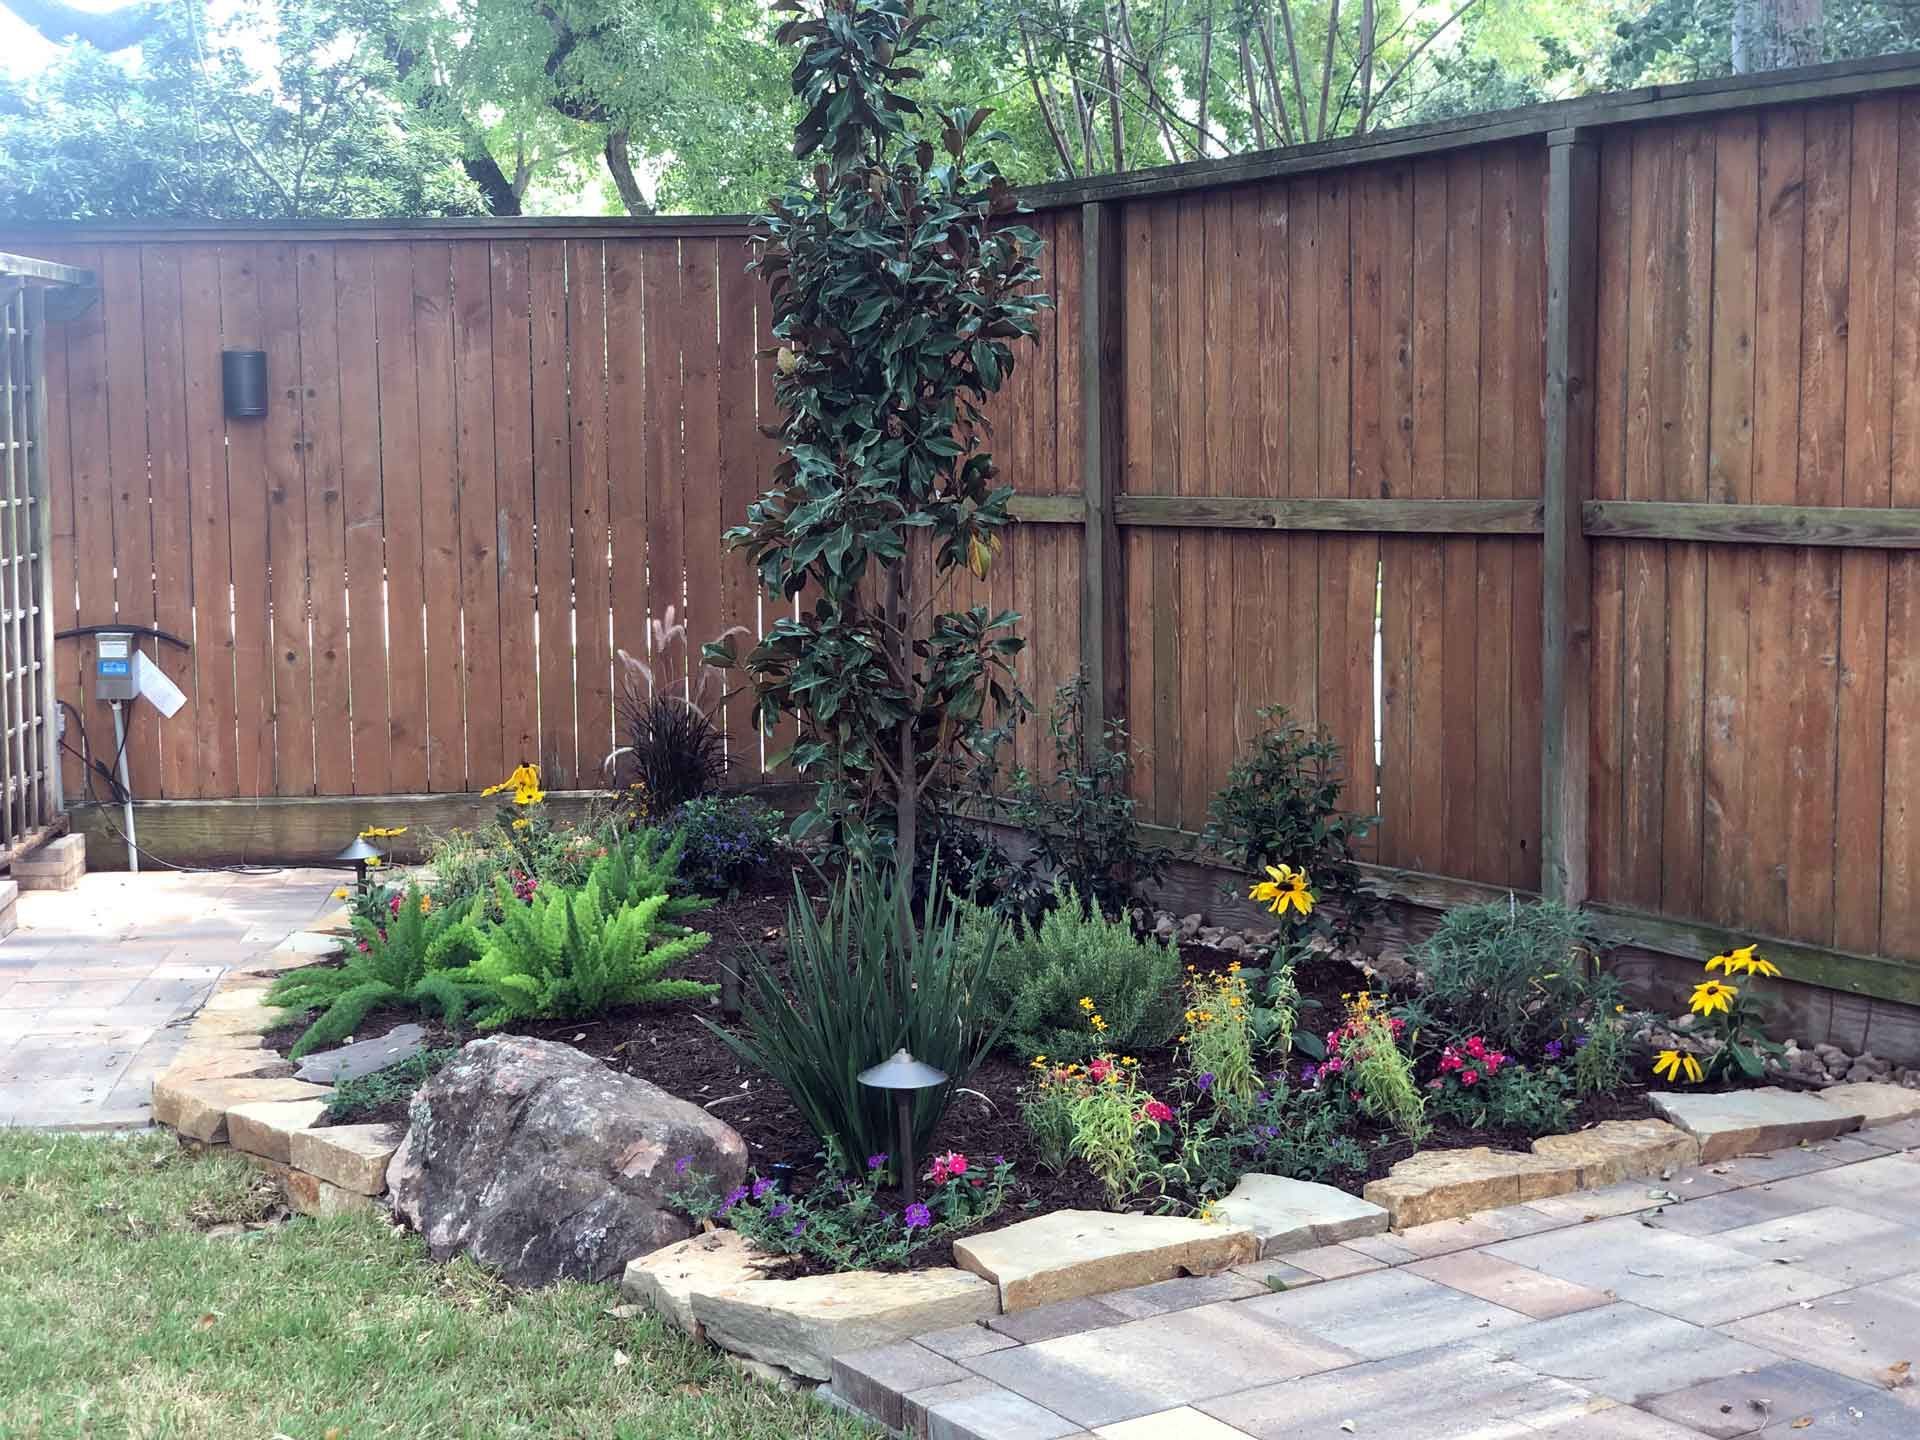 Nice small landscaping bed with plants and shrubbery